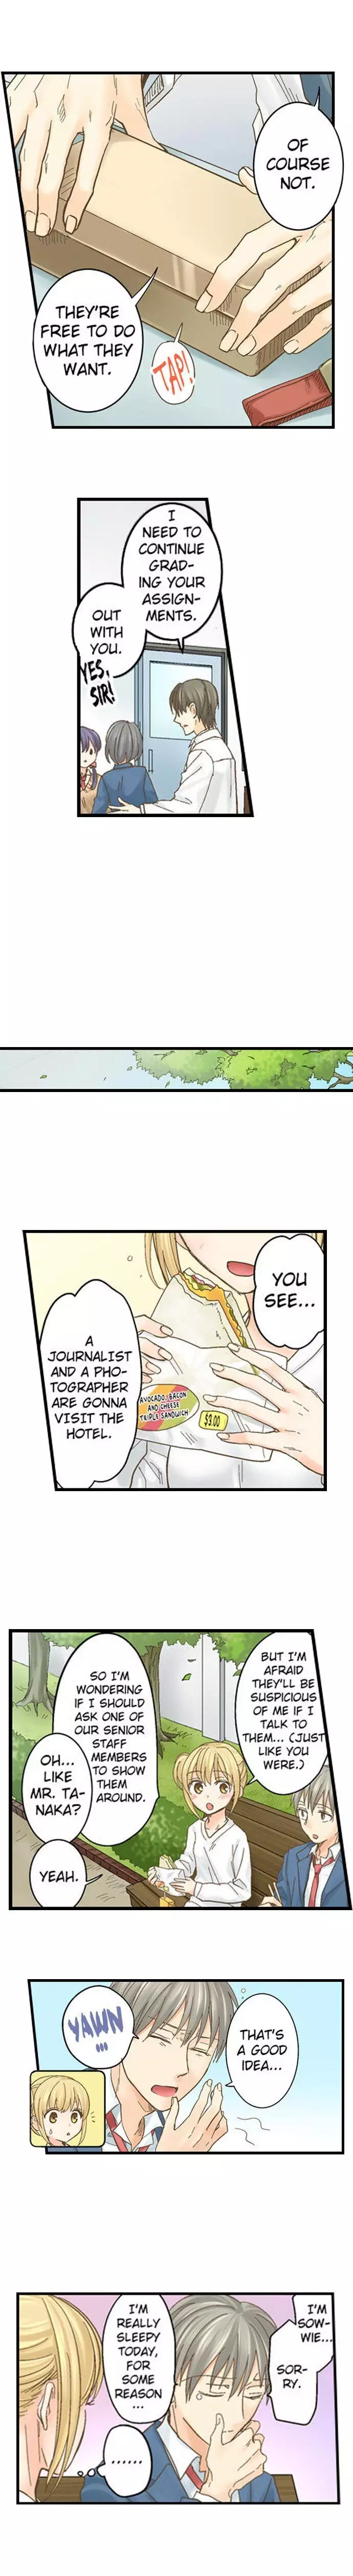 Running A Love Hotel With My Math Teacher - 53 page 2